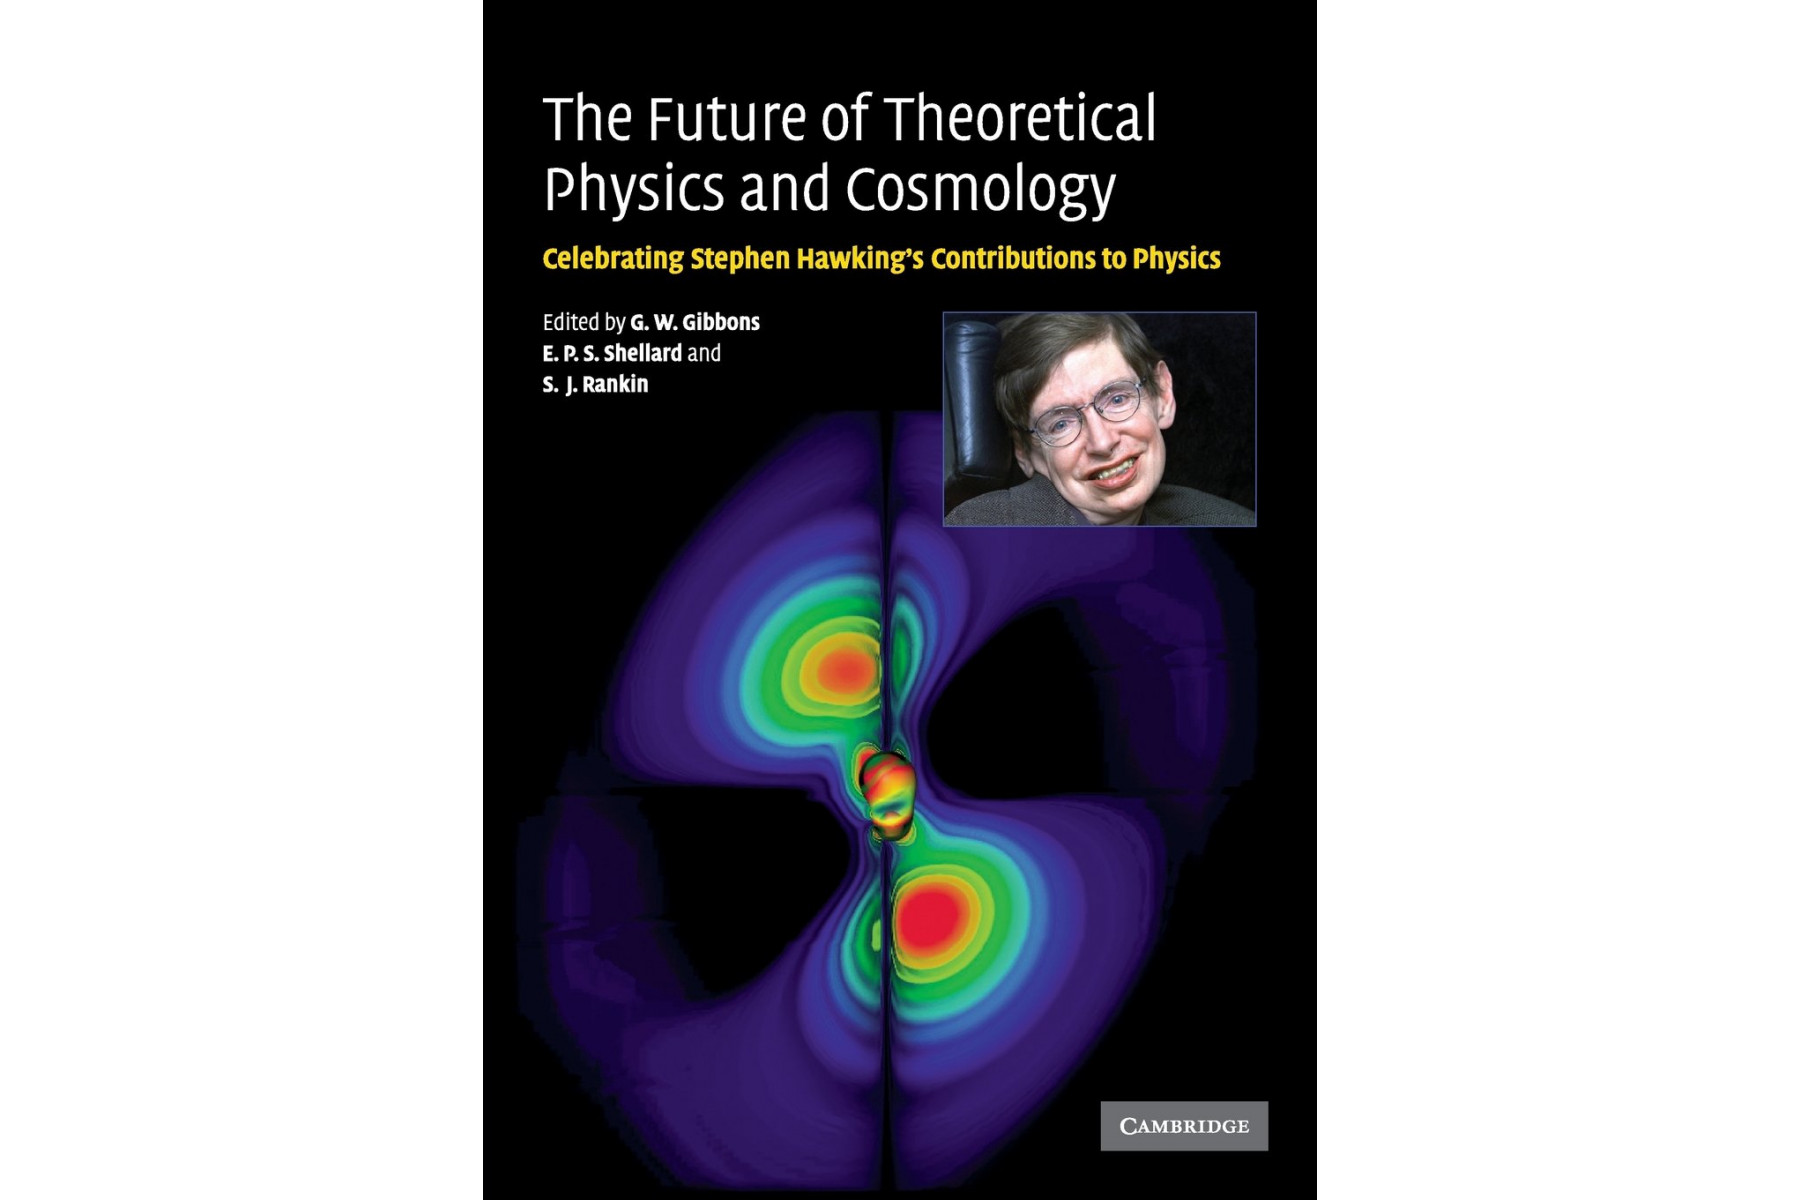 The Future of Theoretical Physics and Cosmology